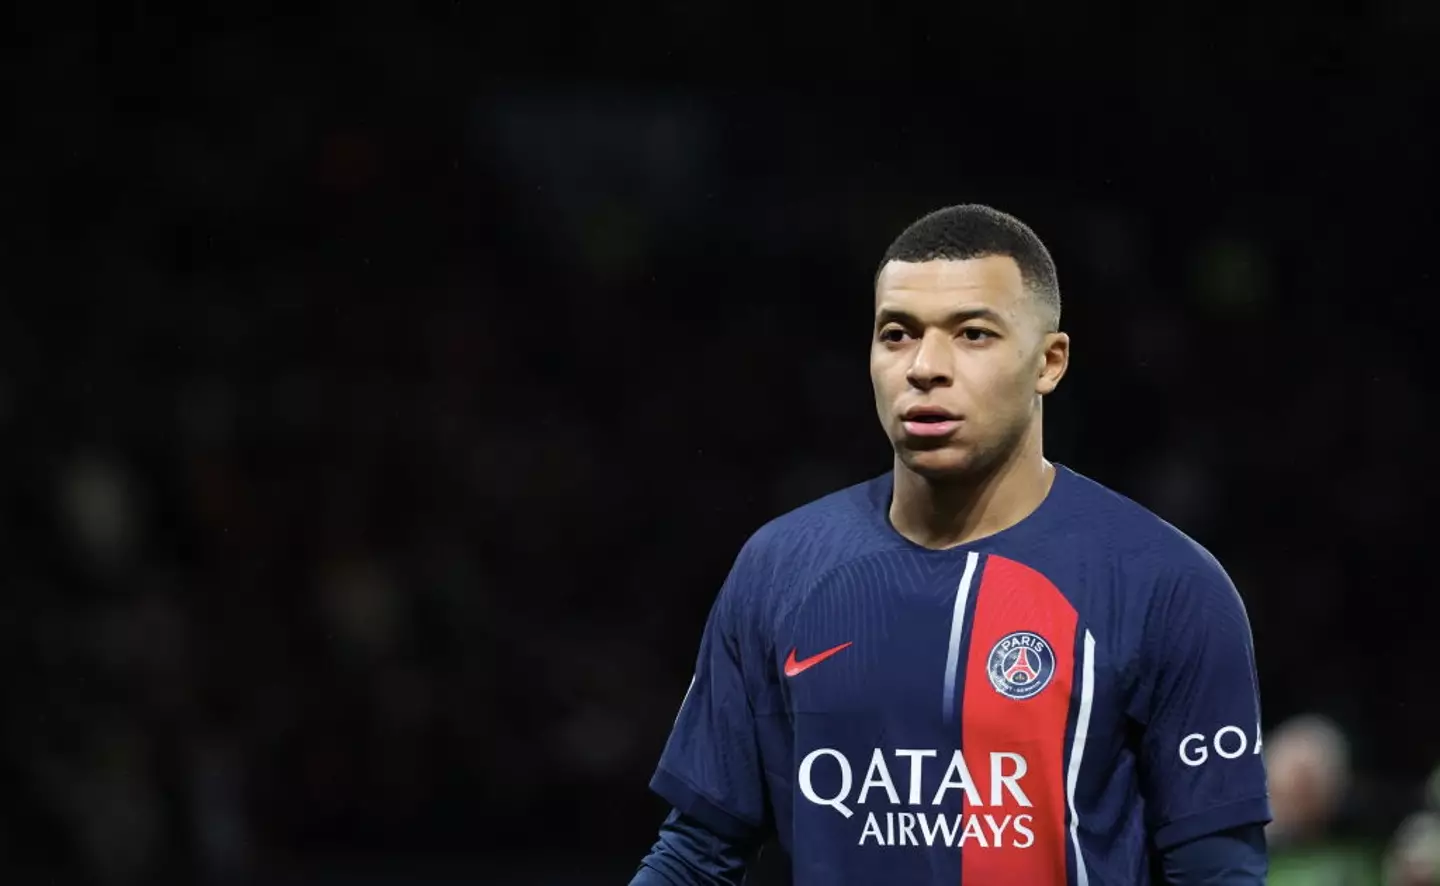 Kylian Mbappe could sign a pre-contract agreement next month (Image: Getty)